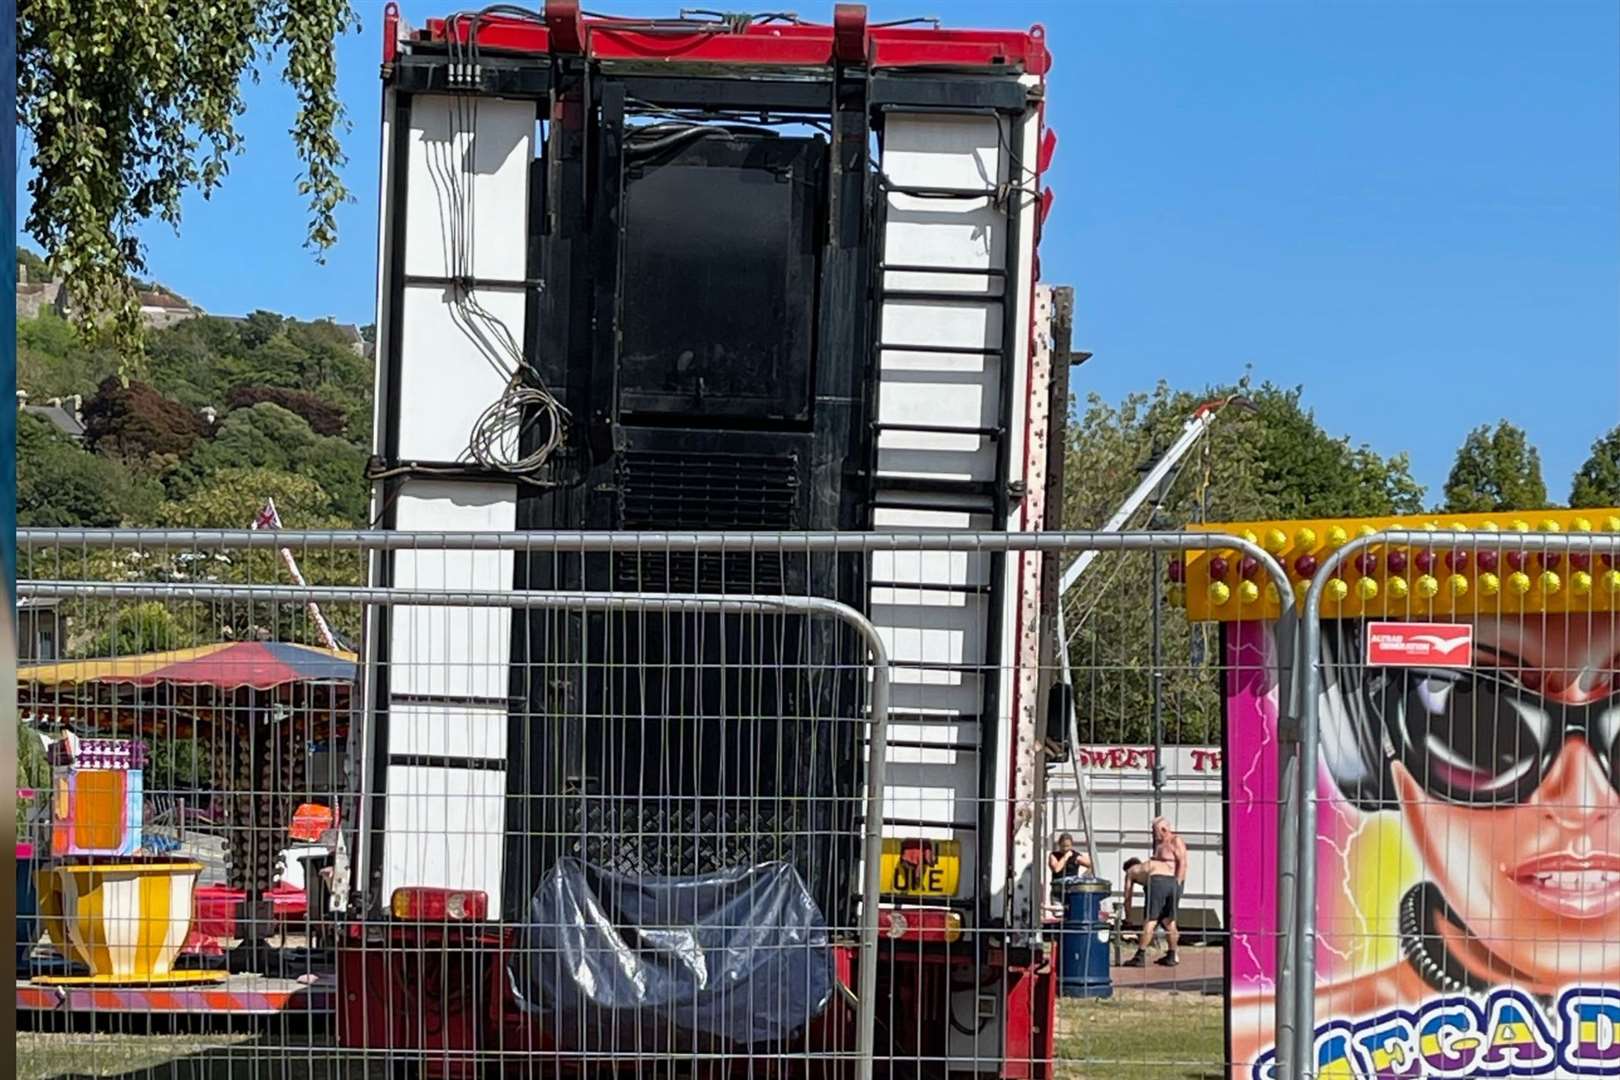 The fairground ride connected with a teenage boy's death has been removed. Photo: David Joseph Wright (58452859)